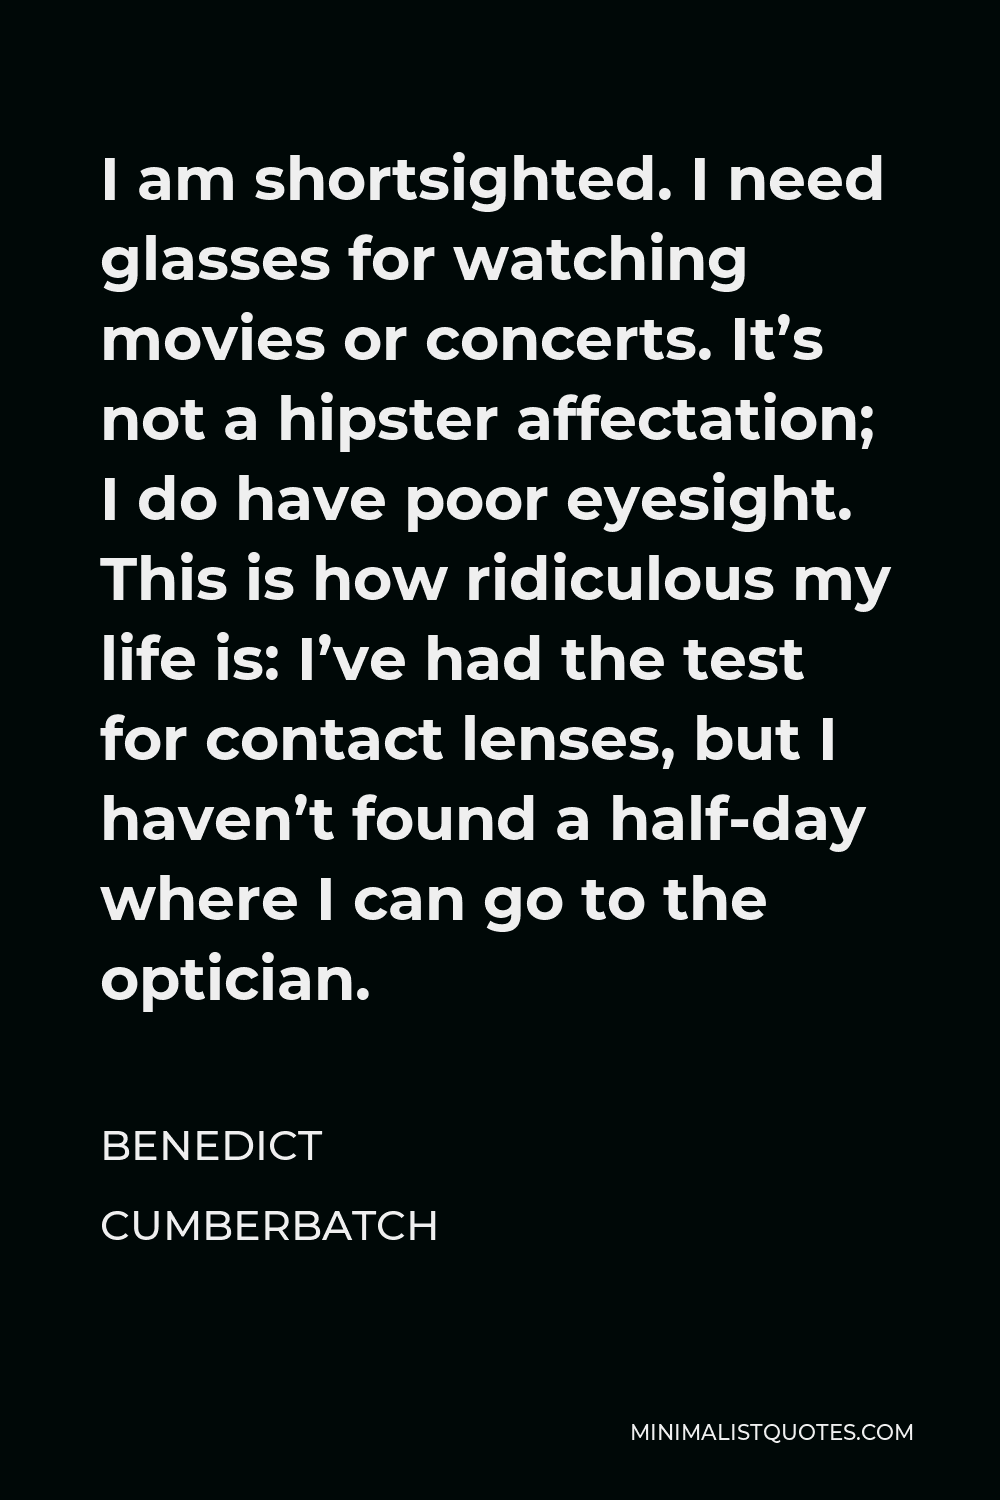 Benedict Cumberbatch Quote - I am shortsighted. I need glasses for watching movies or concerts. It’s not a hipster affectation; I do have poor eyesight. This is how ridiculous my life is: I’ve had the test for contact lenses, but I haven’t found a half-day where I can go to the optician.